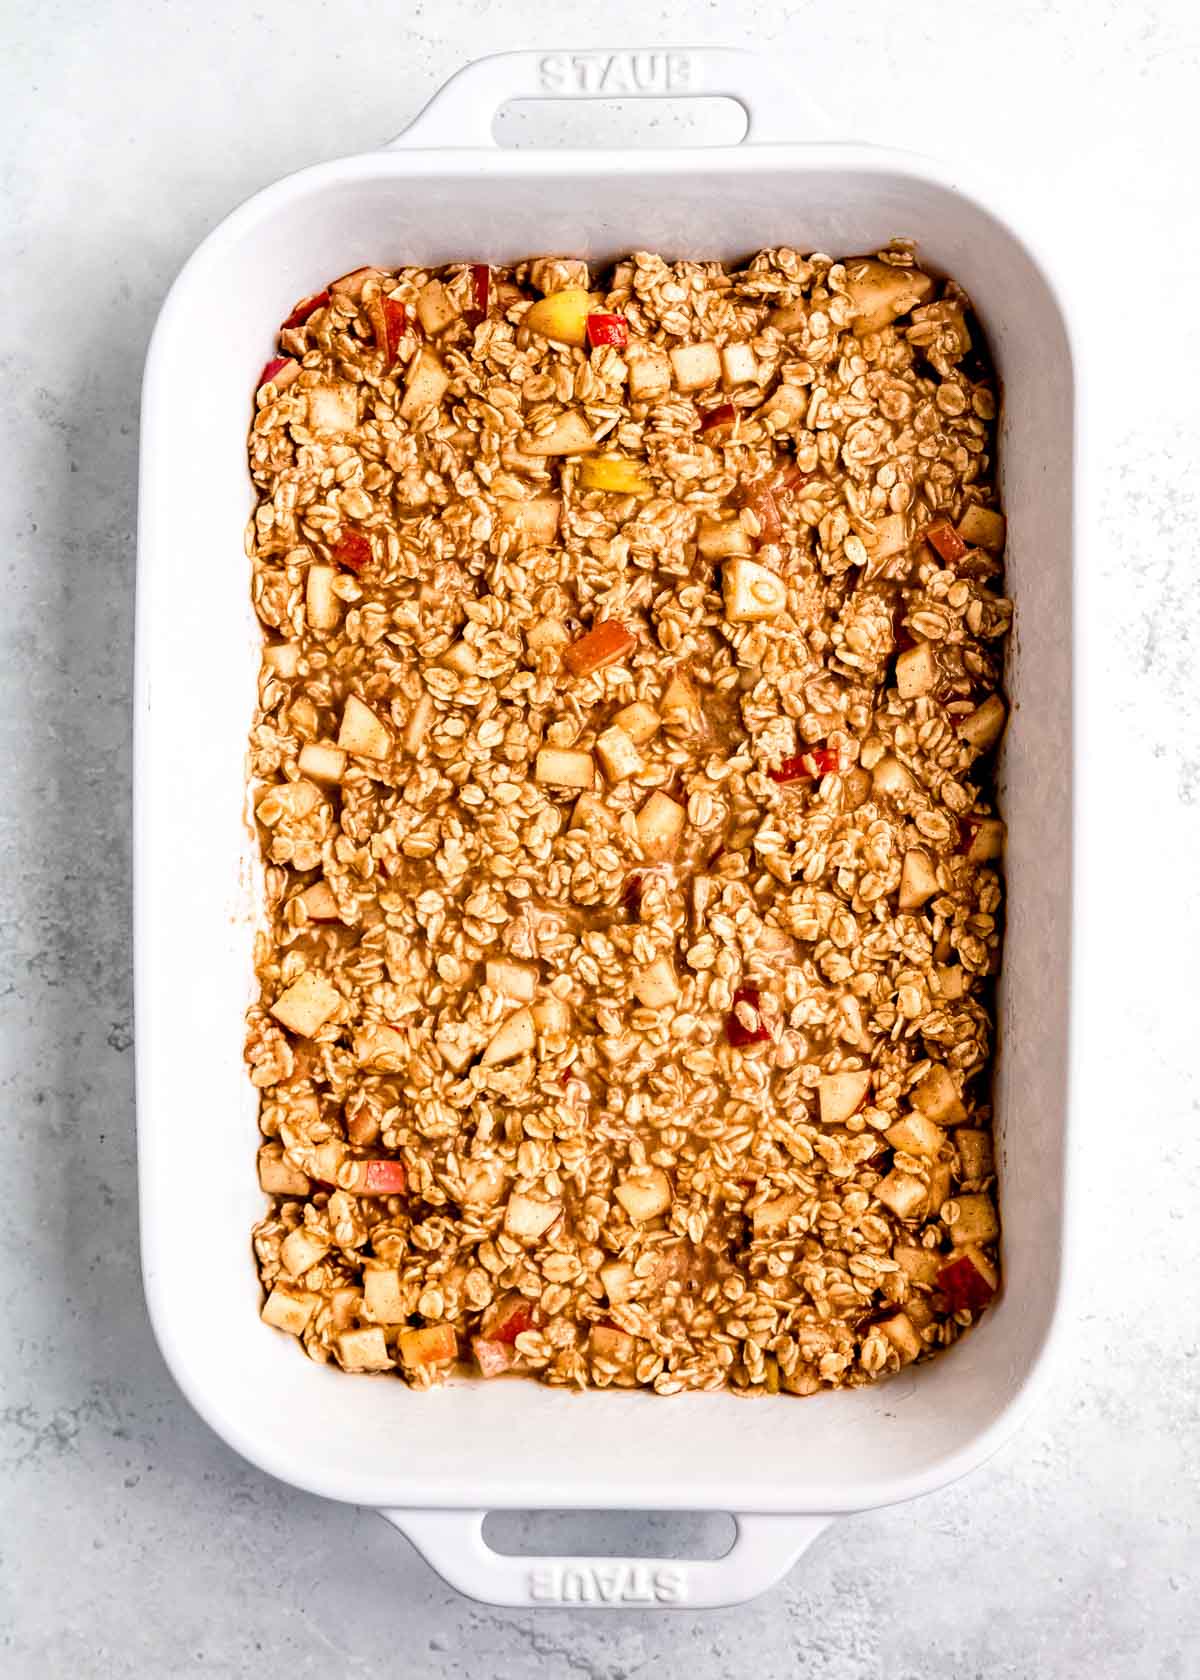 oatmeal base in a greased 9x13 casserole dish